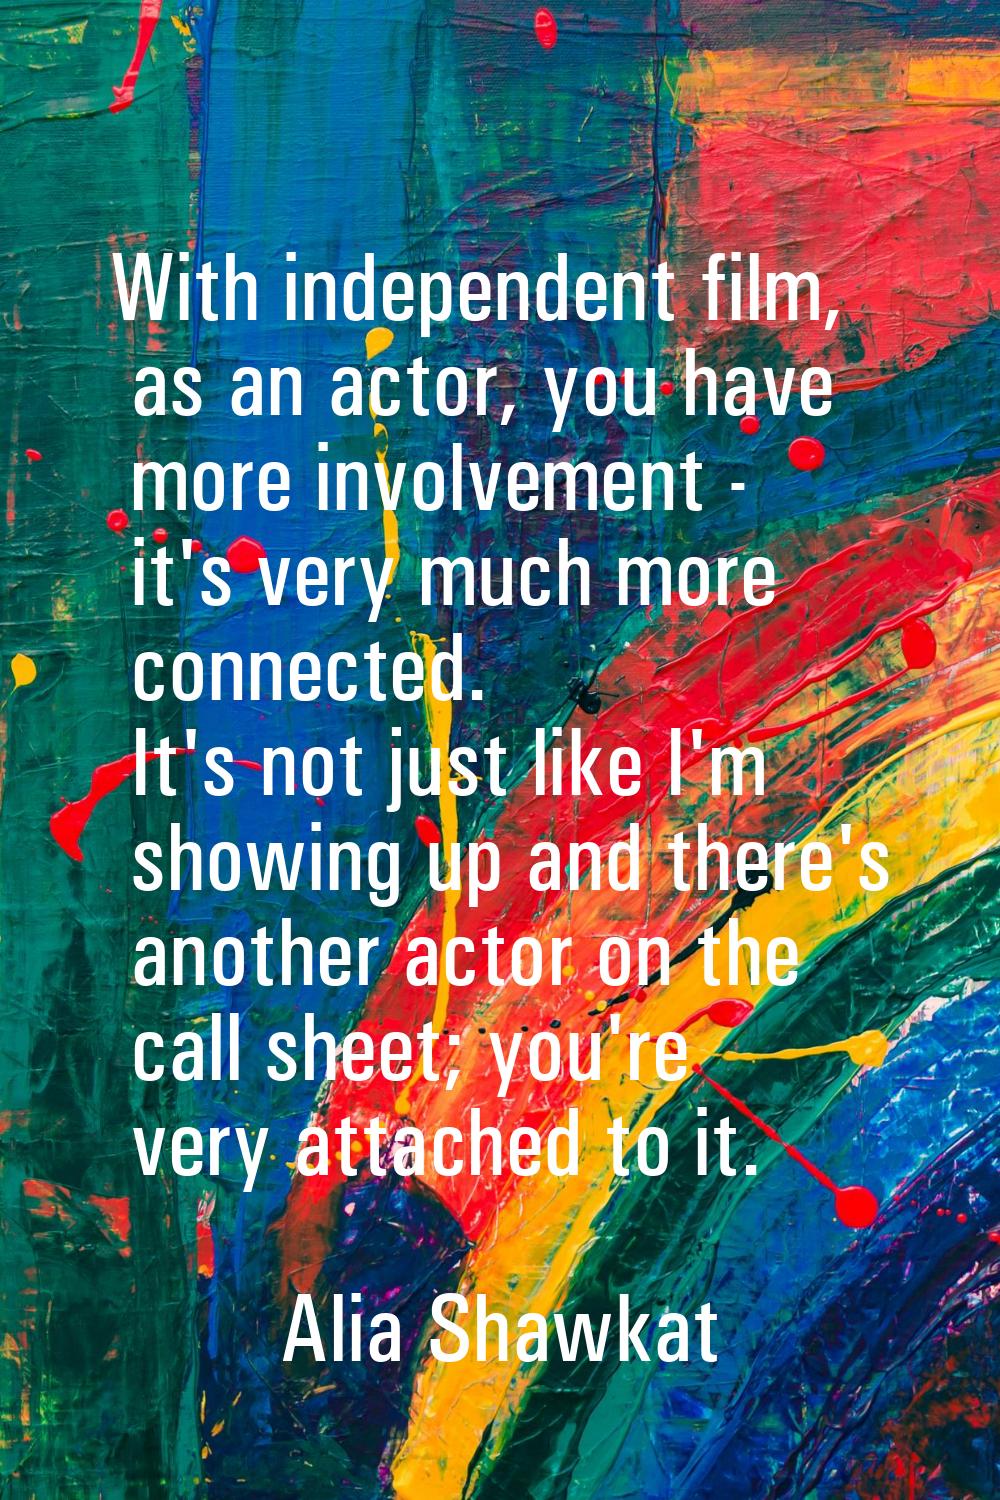 With independent film, as an actor, you have more involvement - it's very much more connected. It's